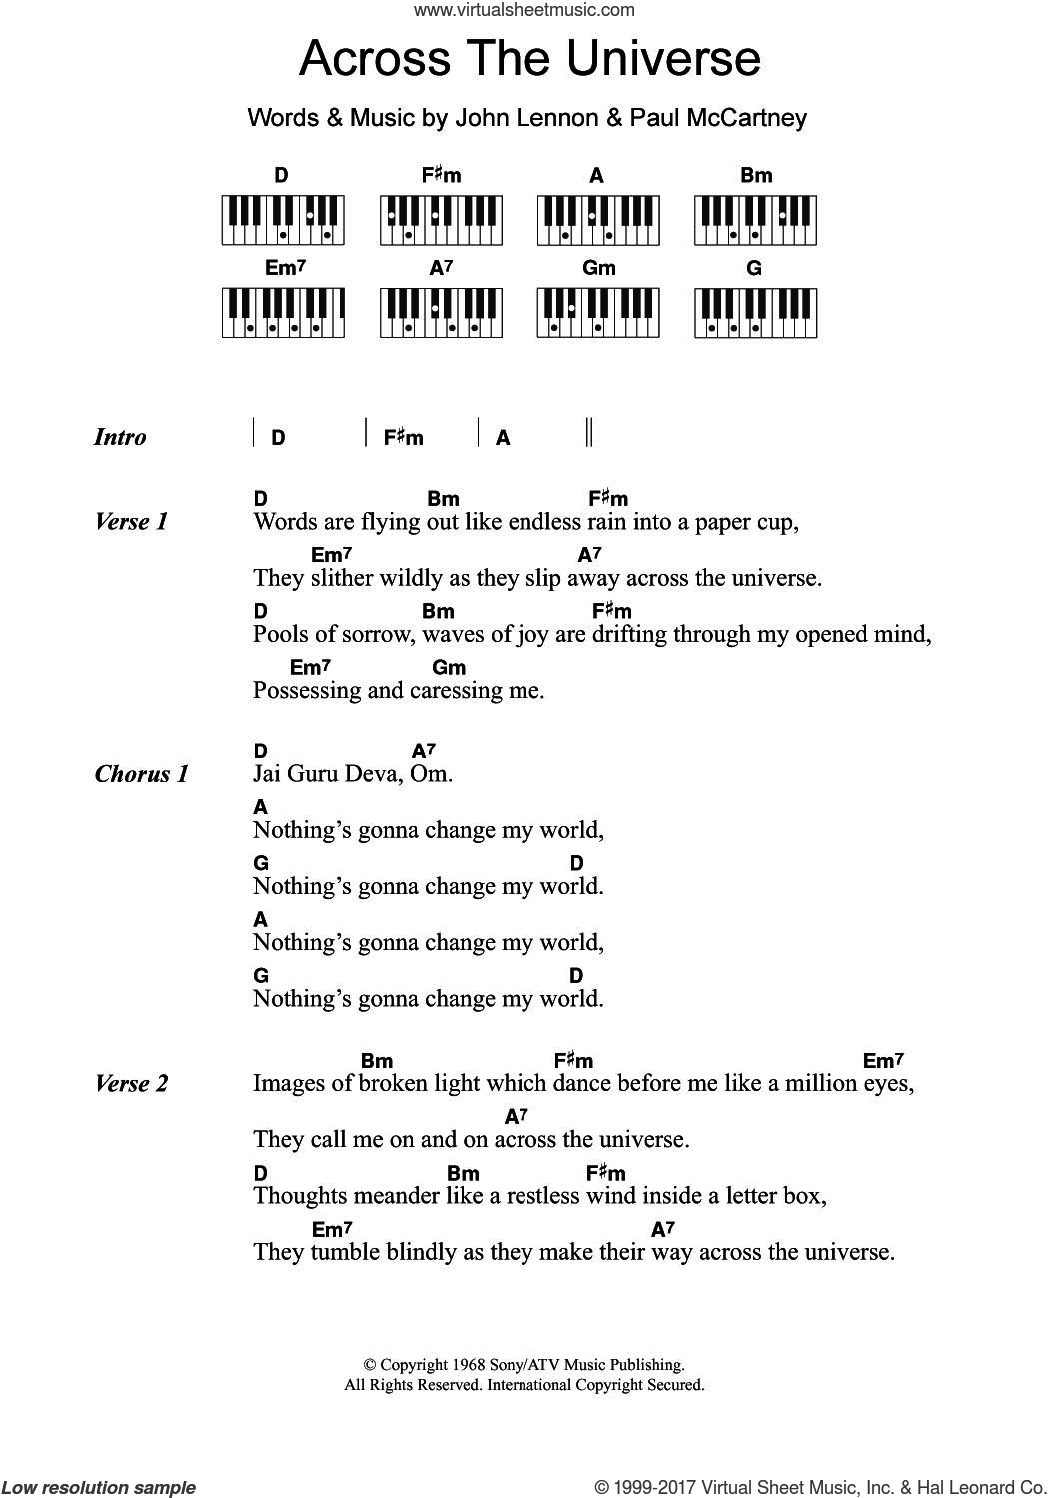 Across The Universe Chords Beatles Across The Universe Sheet Music For Piano Solo Chords Lyrics Melody